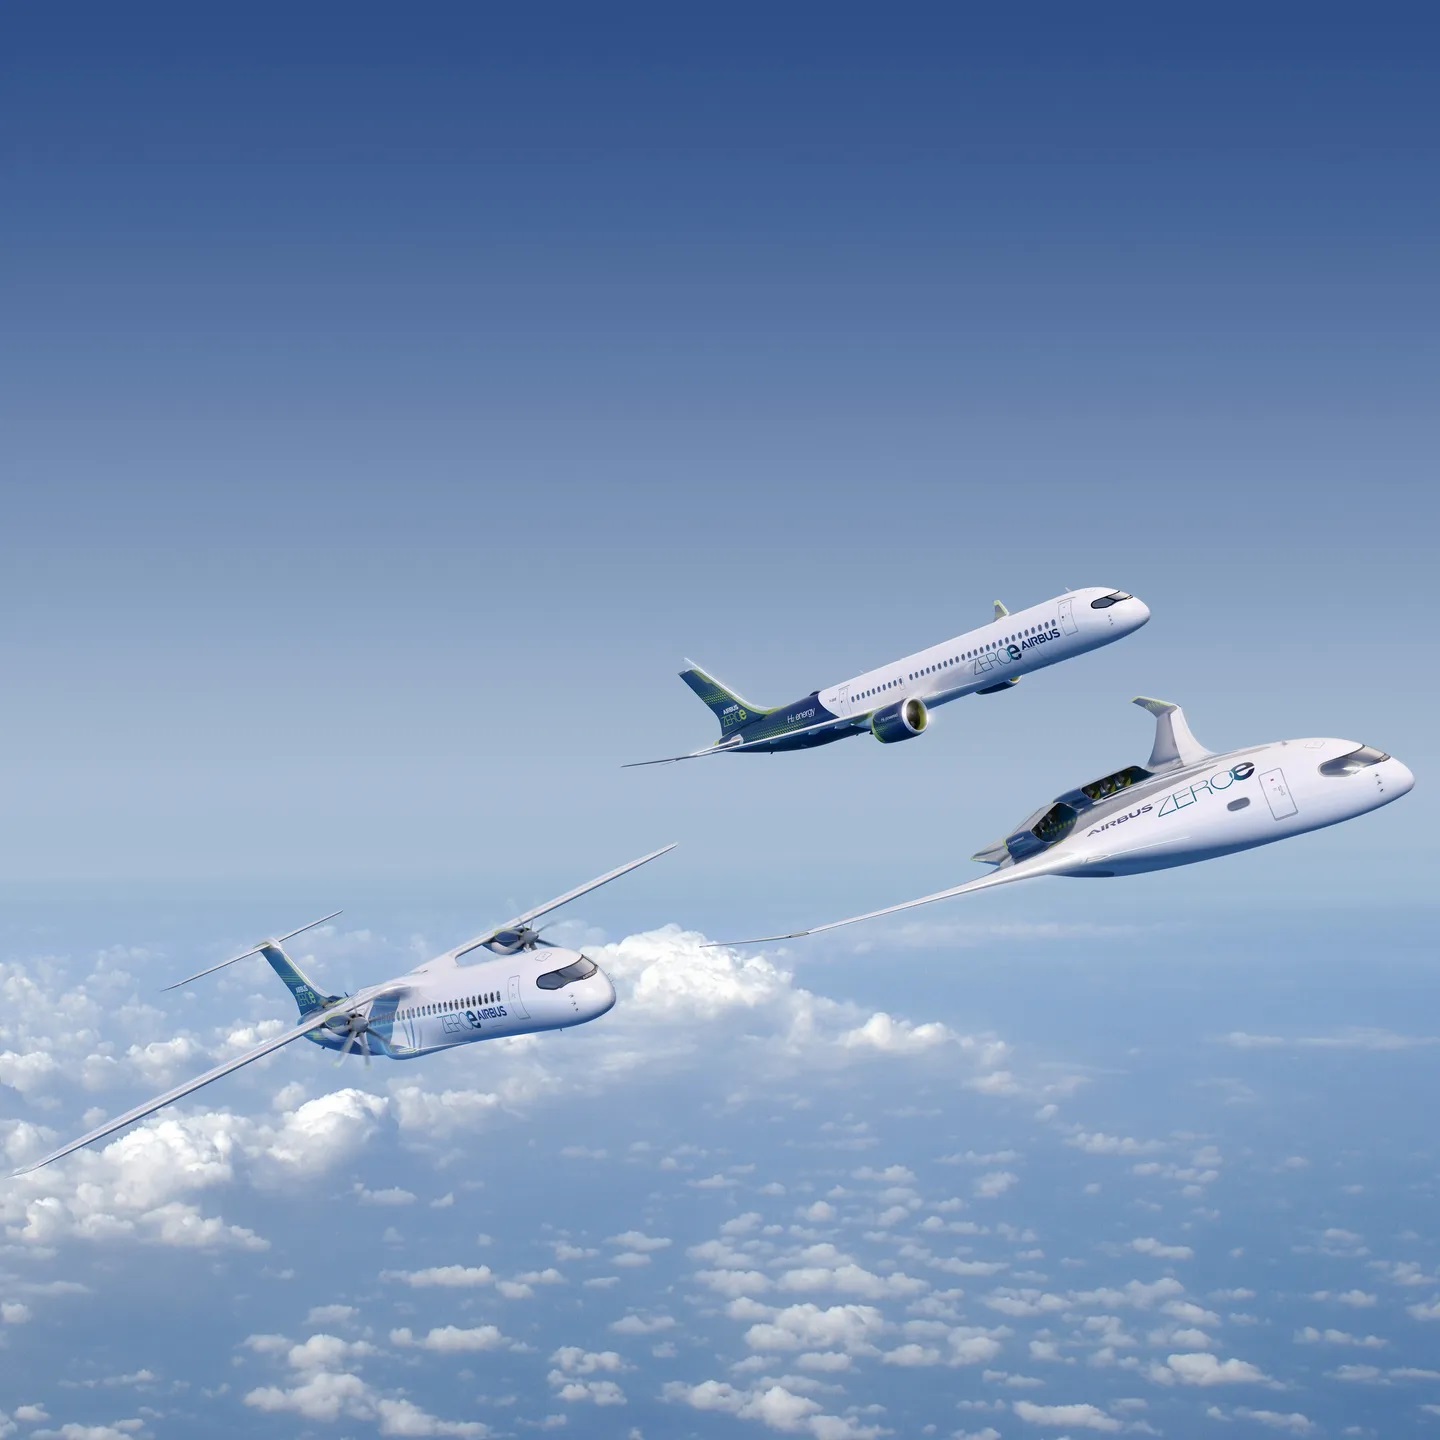 Photo: three generations of hybrid-electric and hydrogen-electric aircraft as planned by Airbus.